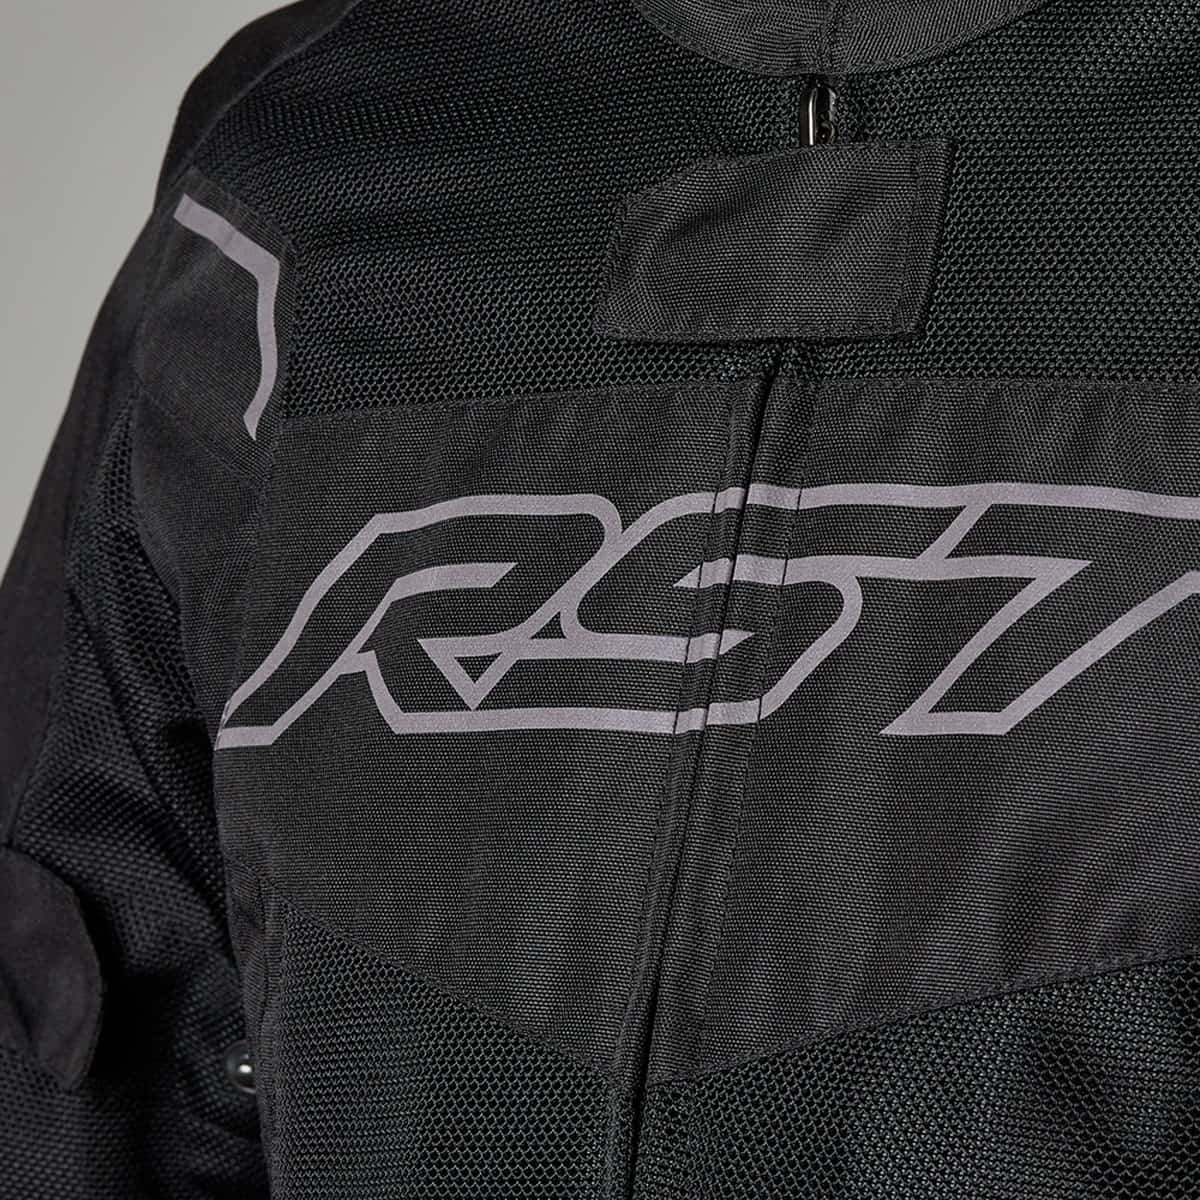 Sporty style mesh jacket from RST with Level 2 armour